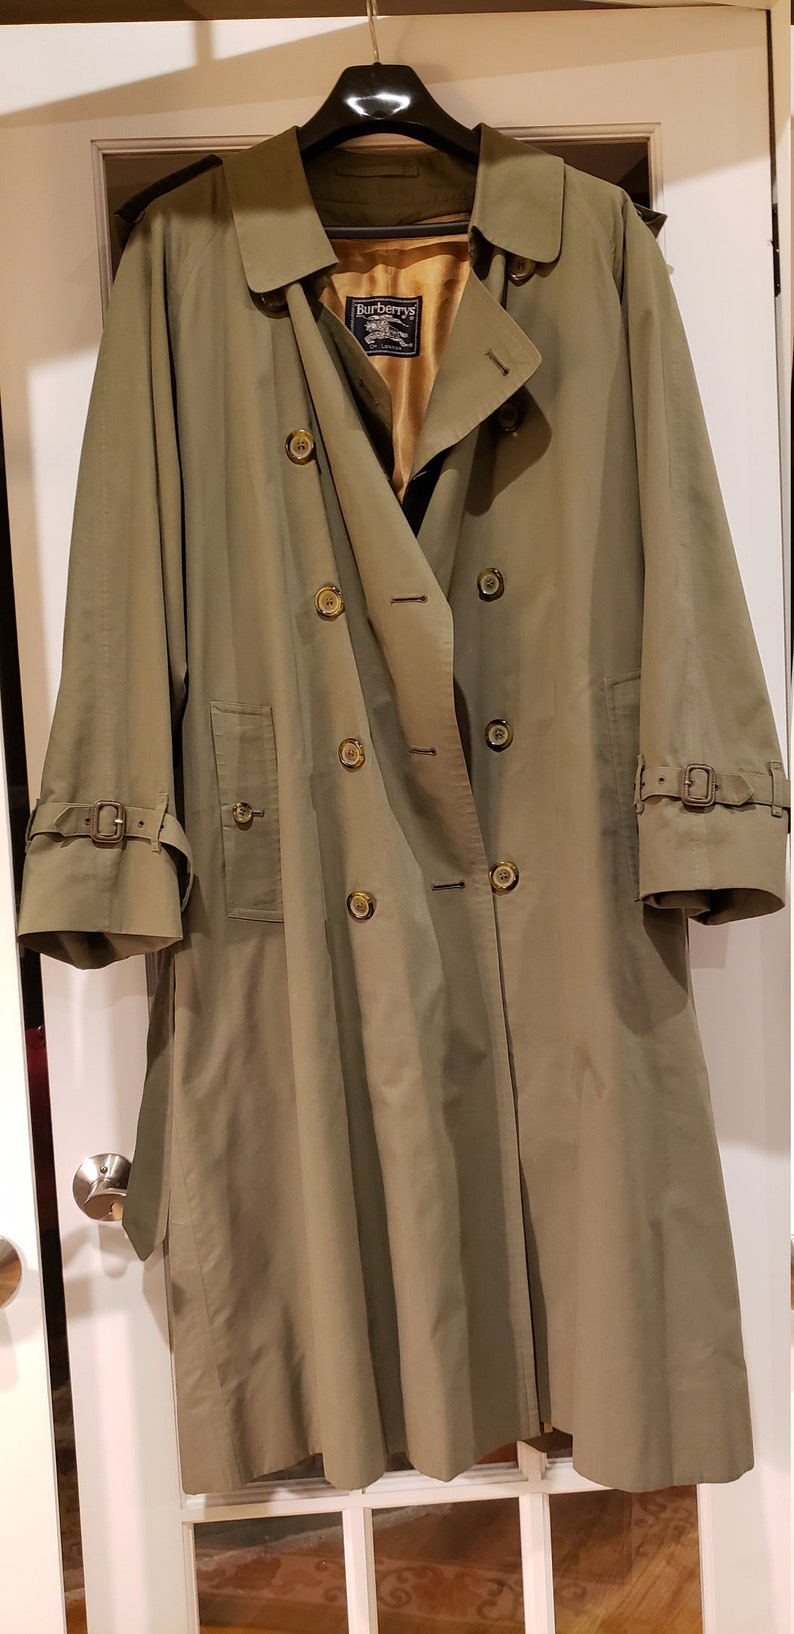 Burberry war Trench Coat double breasted raincoat jacket Olive | Etsy